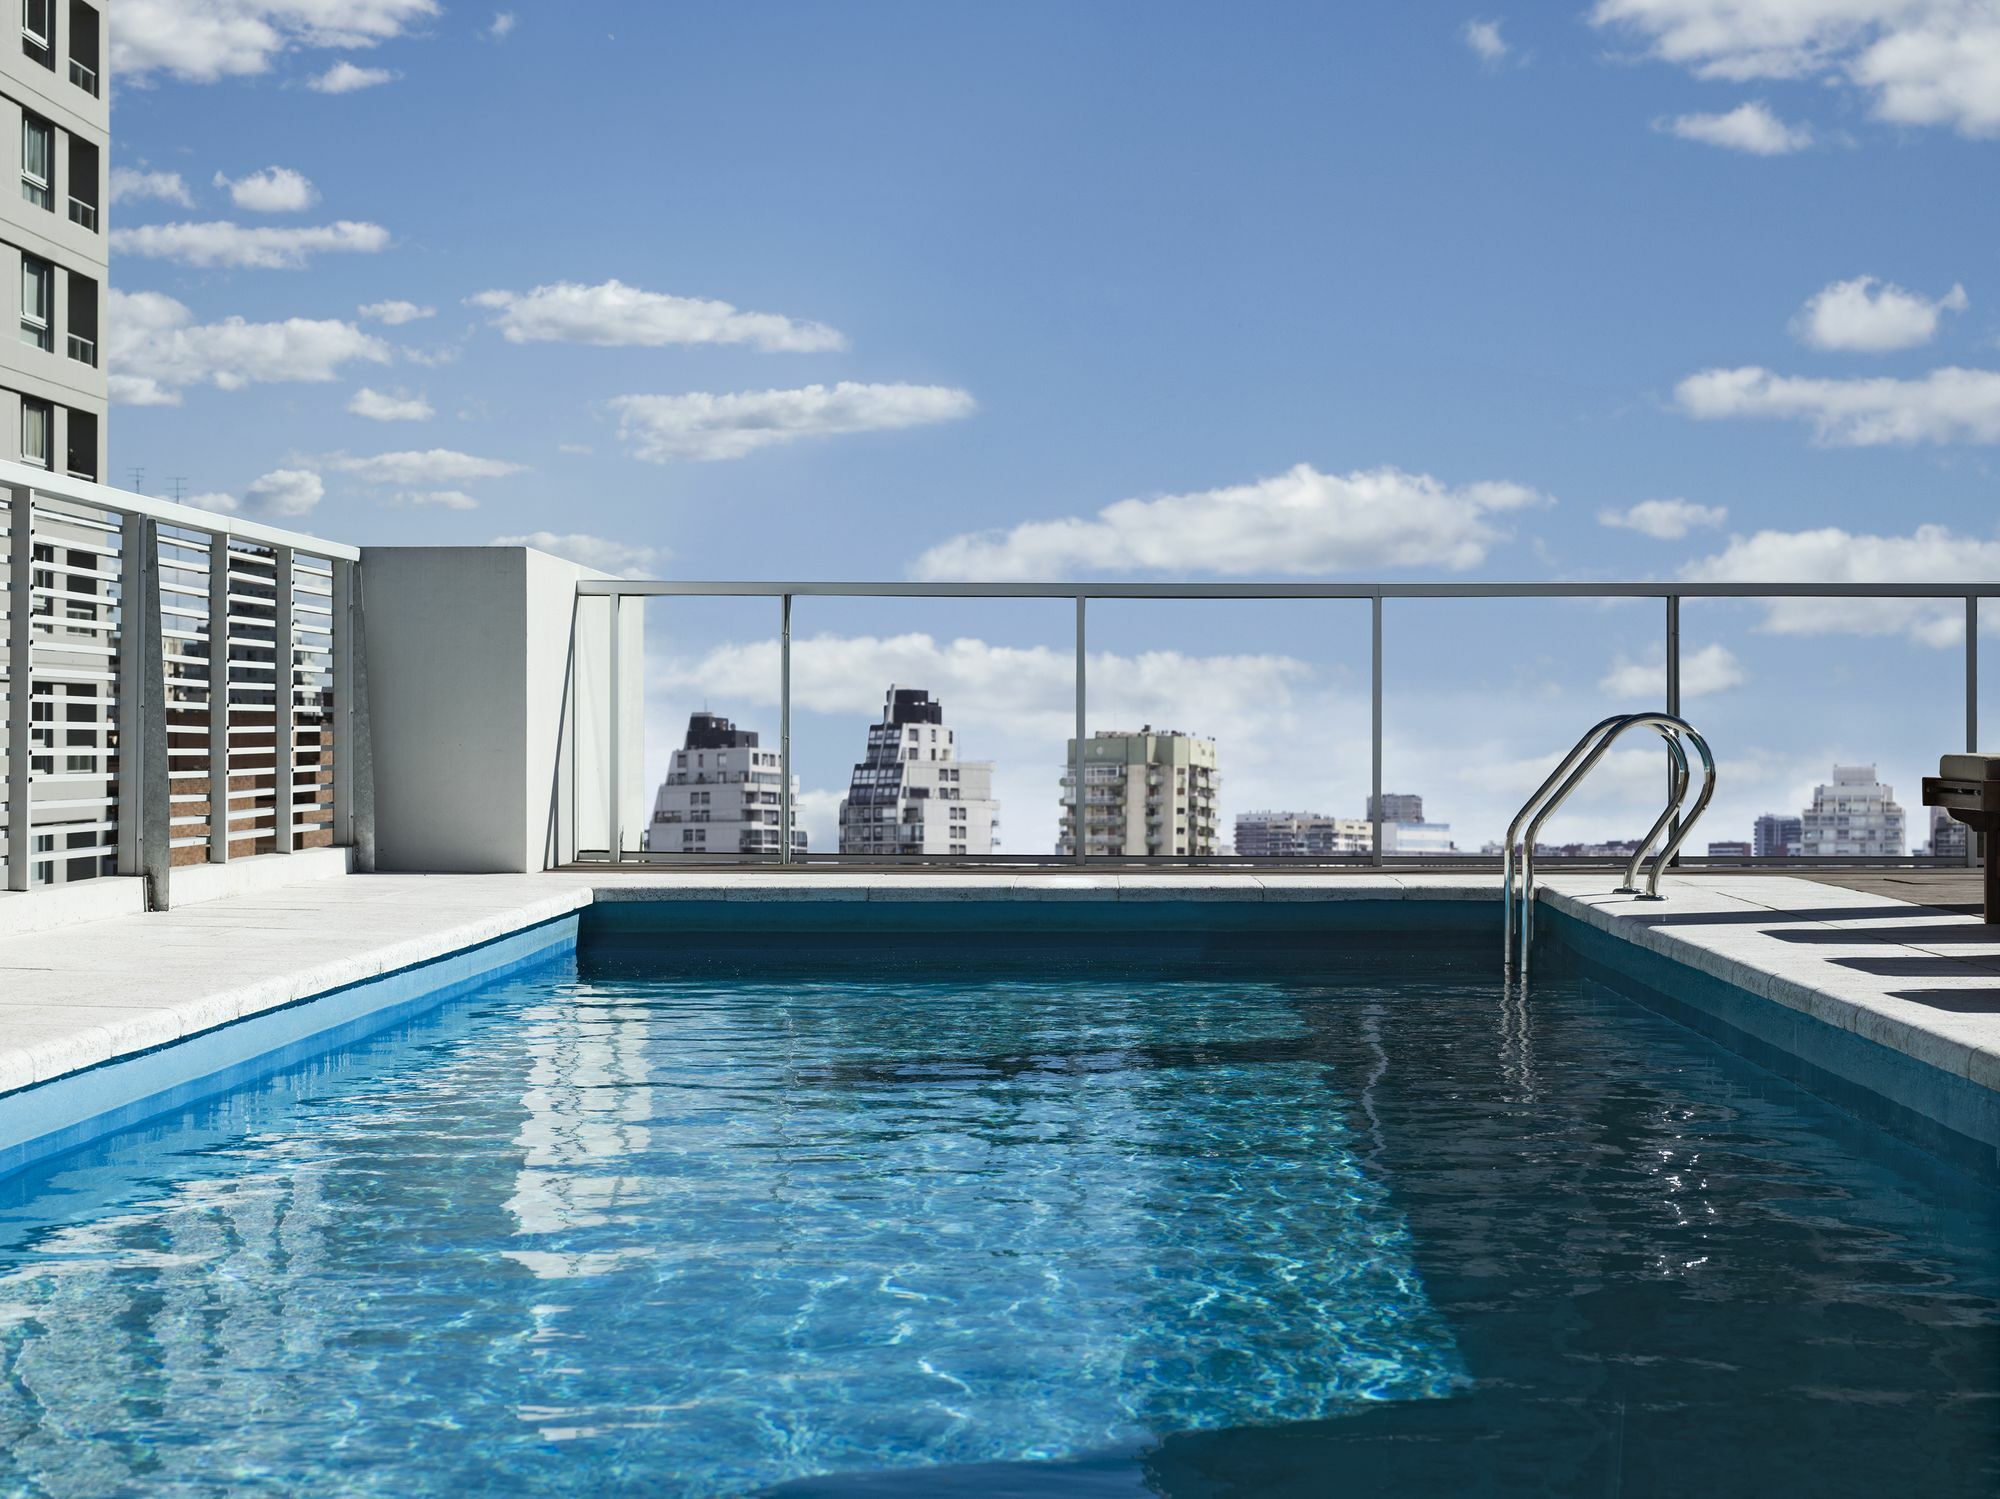 Dazzler By Wyndham Polo Hotel Buenos Aires Exterior photo